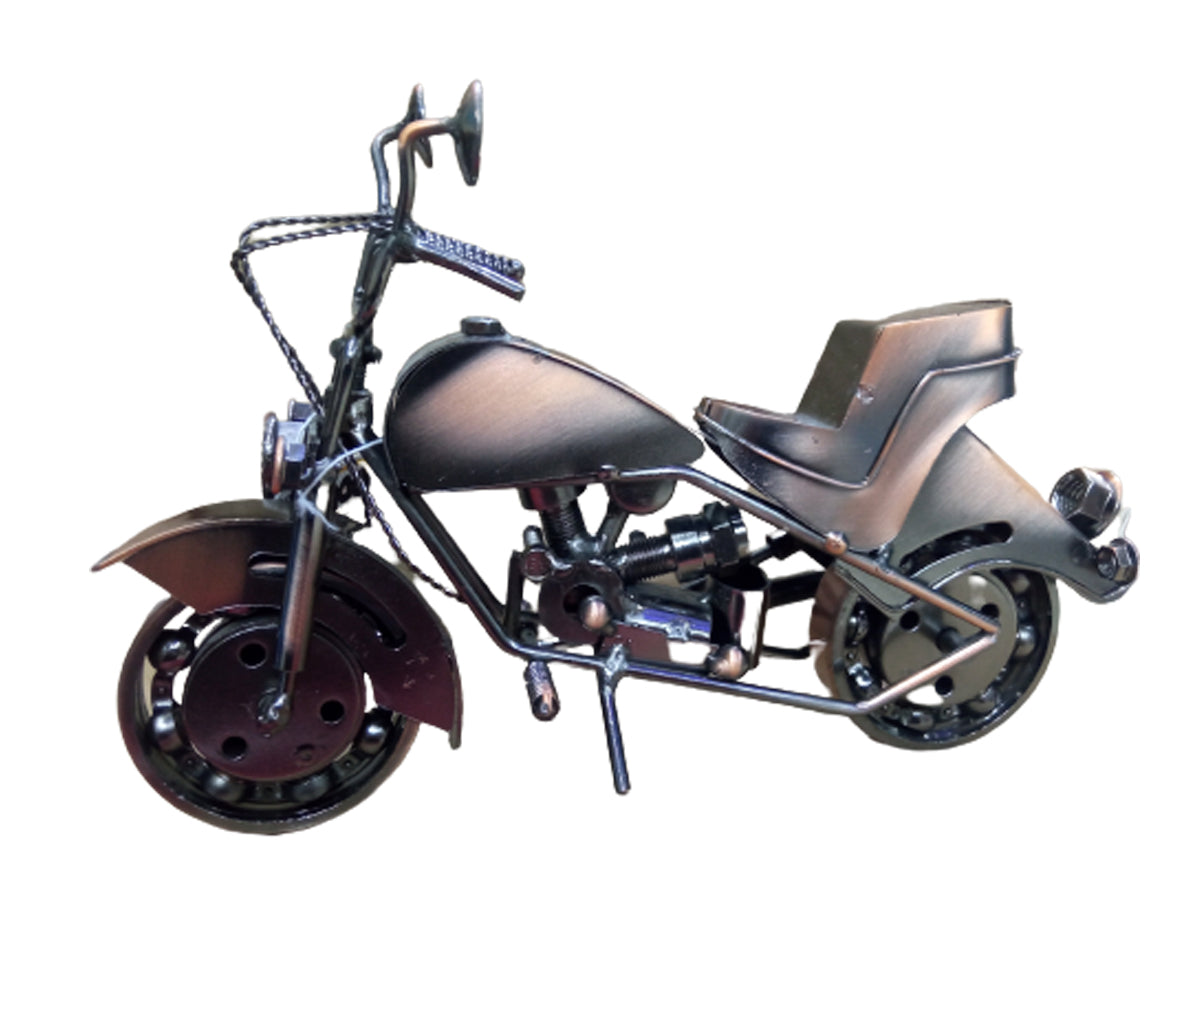 Handmade Retro Motorcycle Model Decoration - A Timeless and Versatile Piece